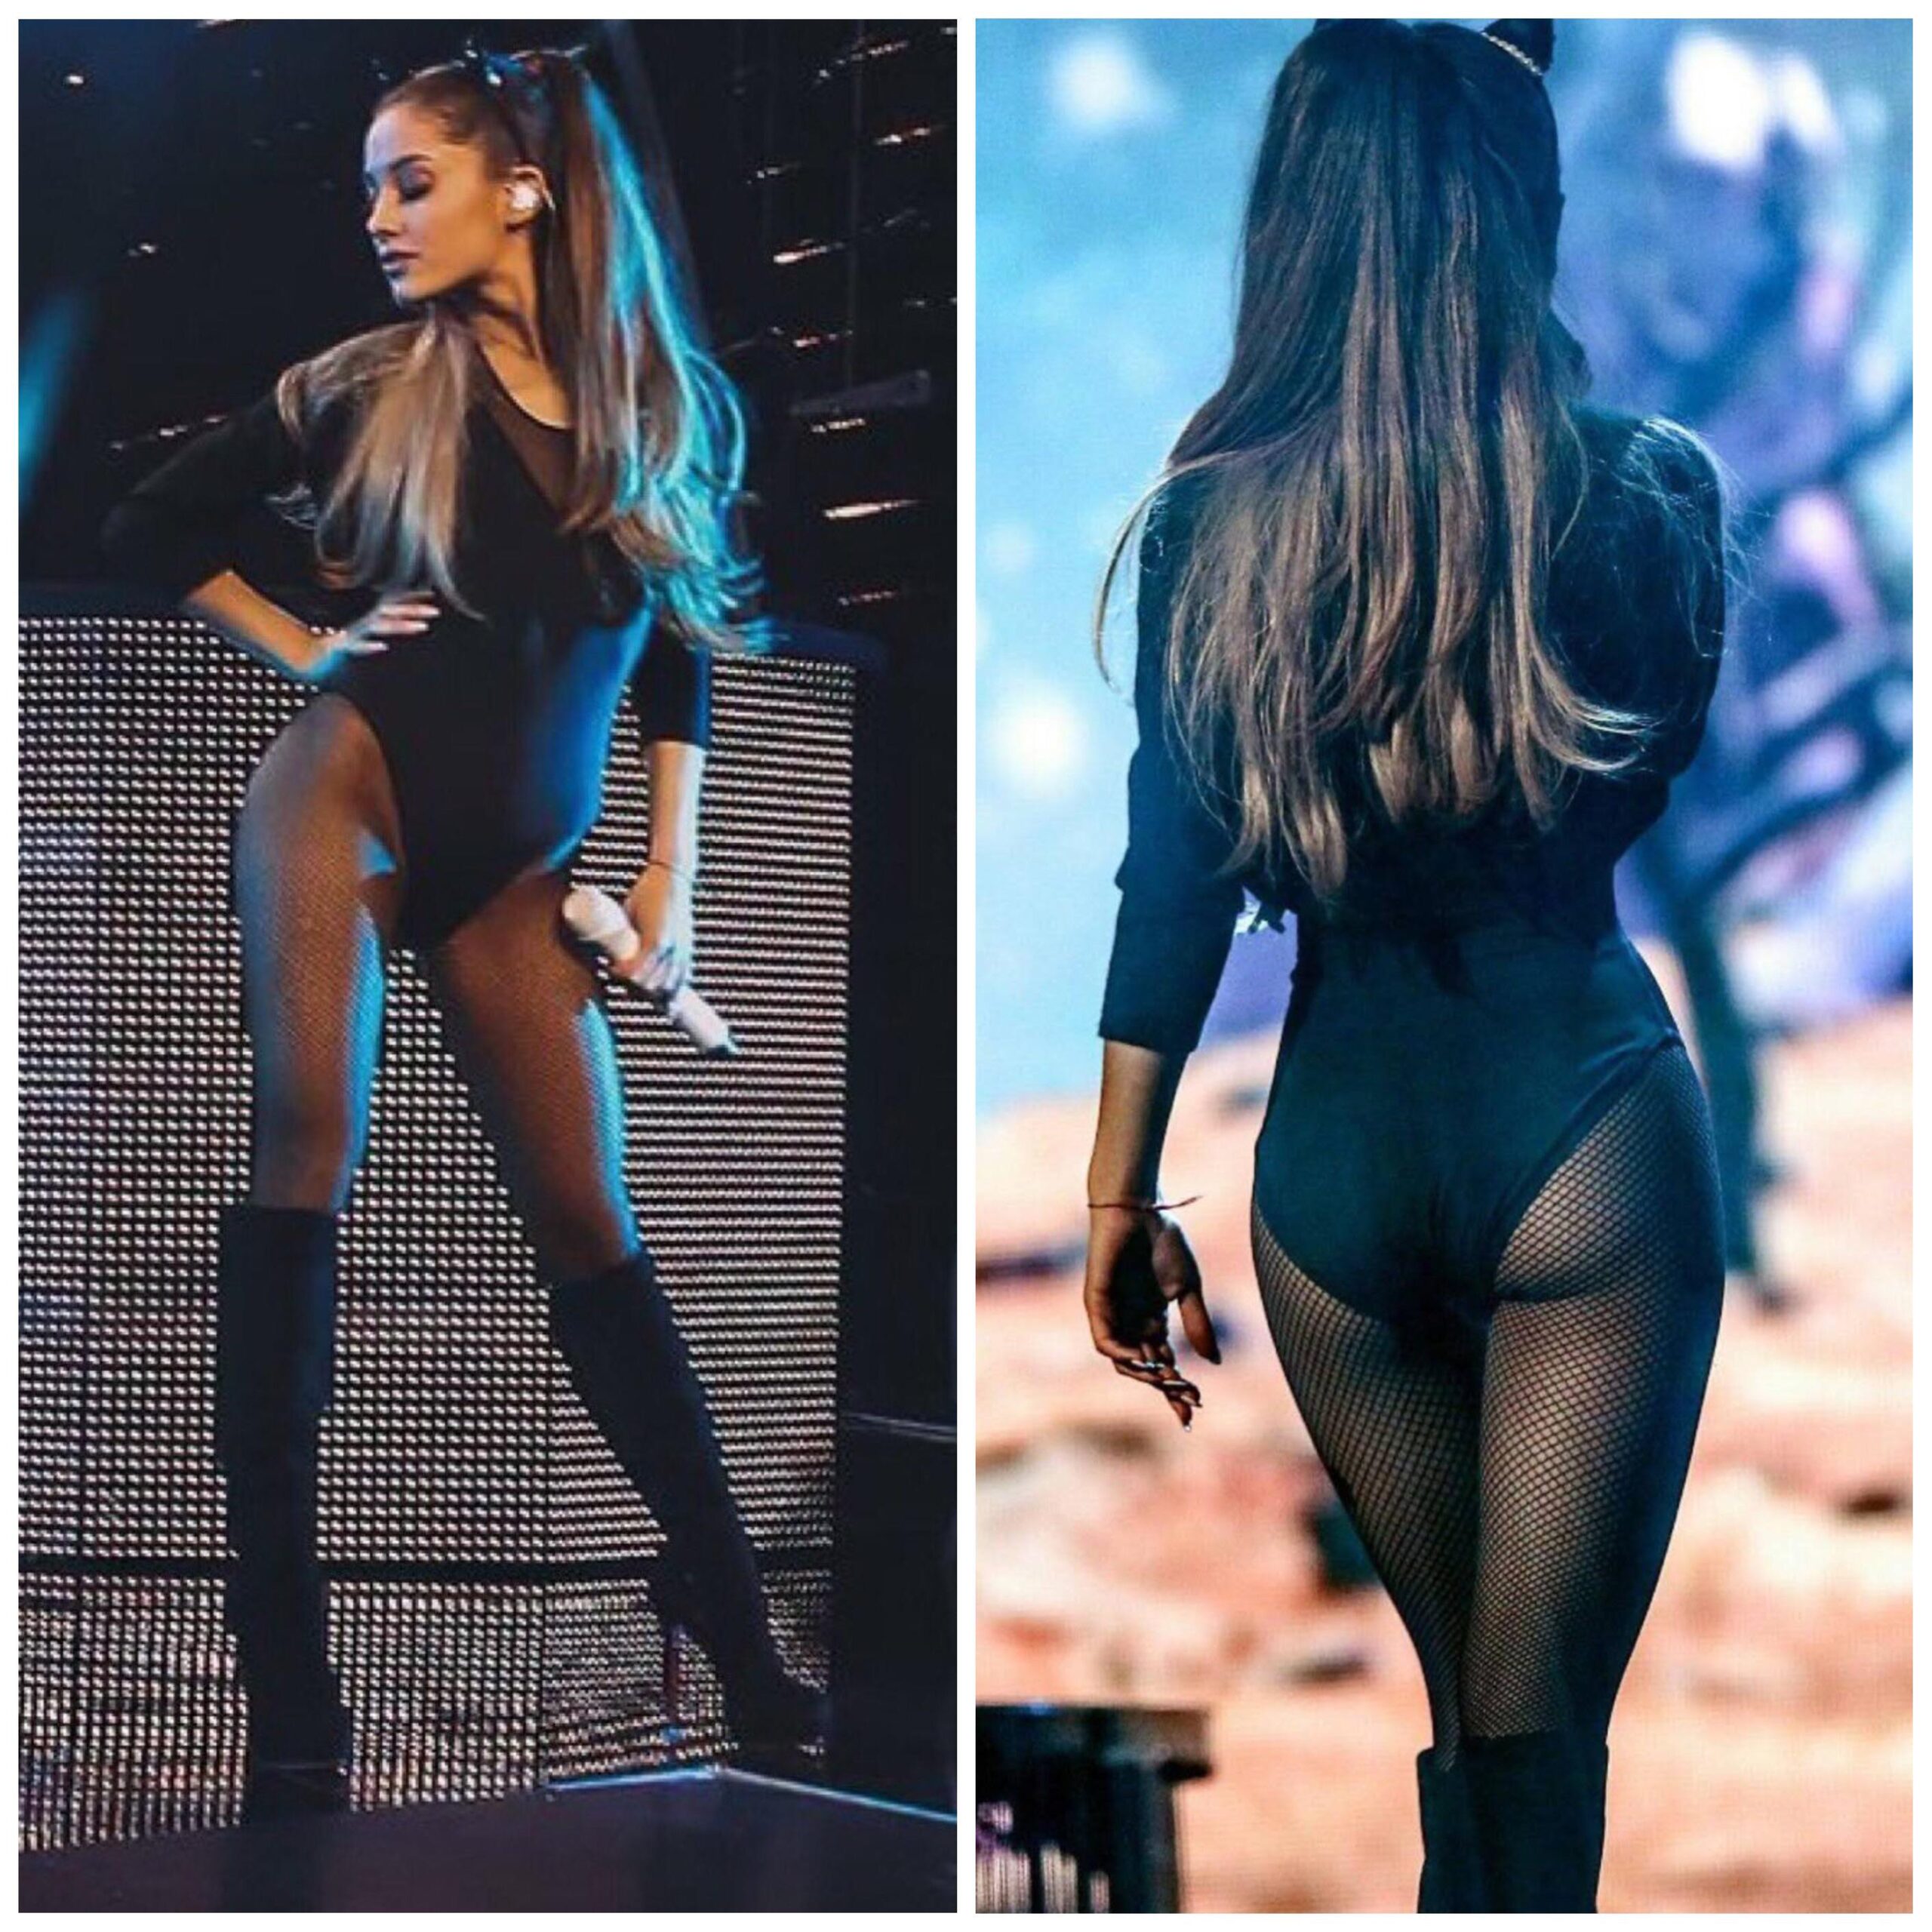 Ariana Grande always looks so damn tight but in this